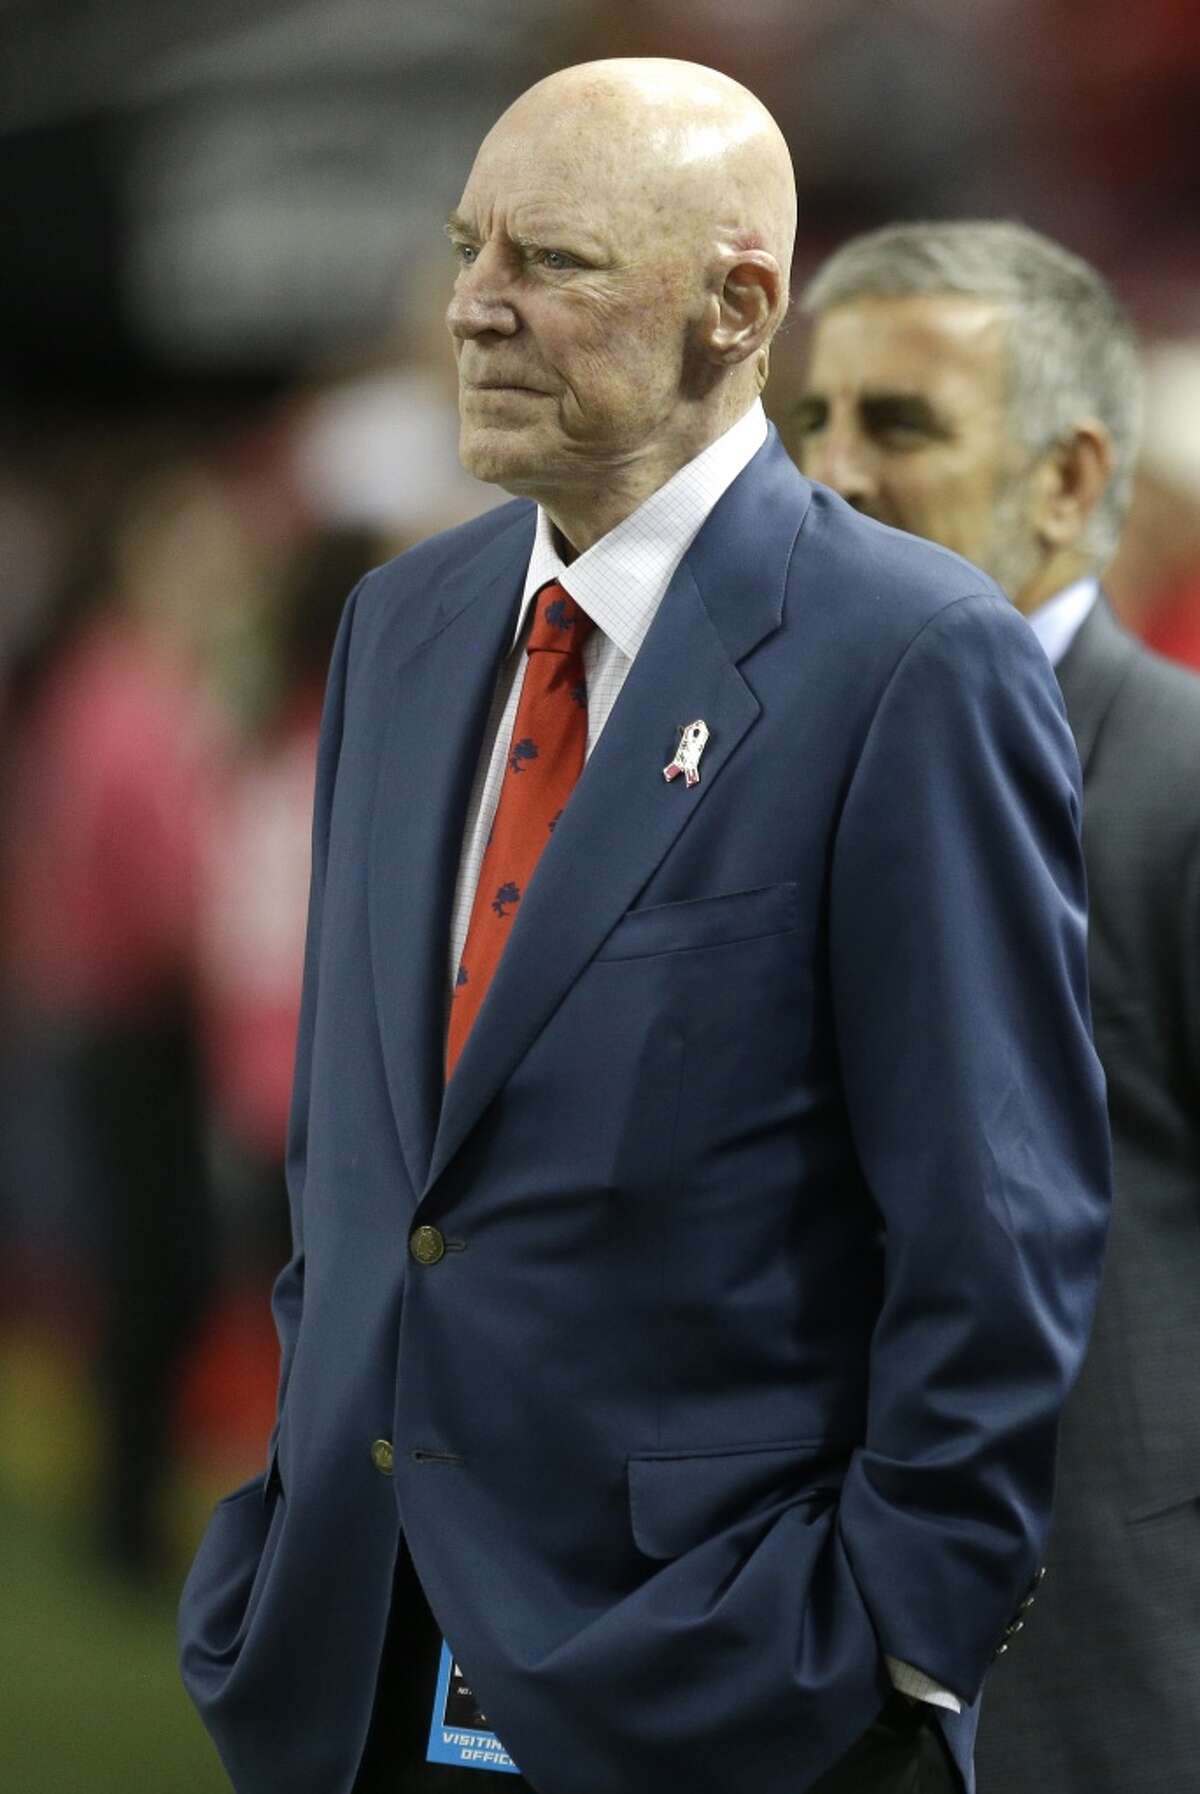 Houston Texans owner Bob McNair donated $10,000 to the anti-HERO campaign this week. McNair is among nearly two dozen Texans who have donated big money in the 2016 presidential race. See the other Lone Star State residents funding the battle for the White House. 